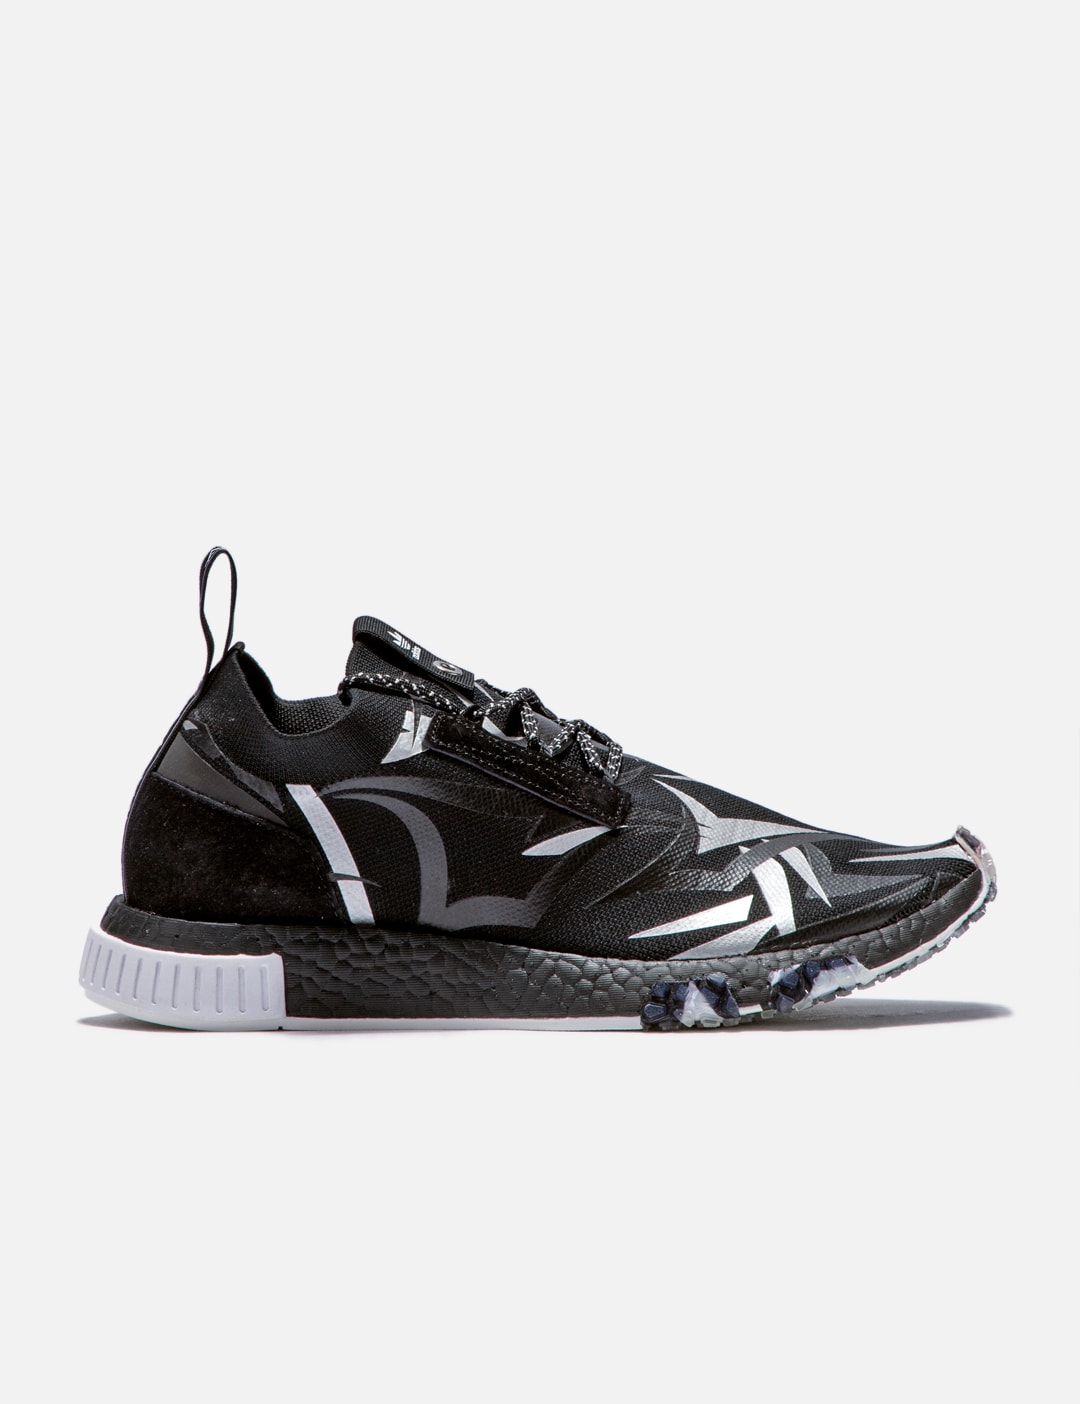 Allergisk Venlighed Skuffelse Adidas - Adidas NMD Racer Juice | HBX - Globally Curated Fashion and  Lifestyle by Hypebeast